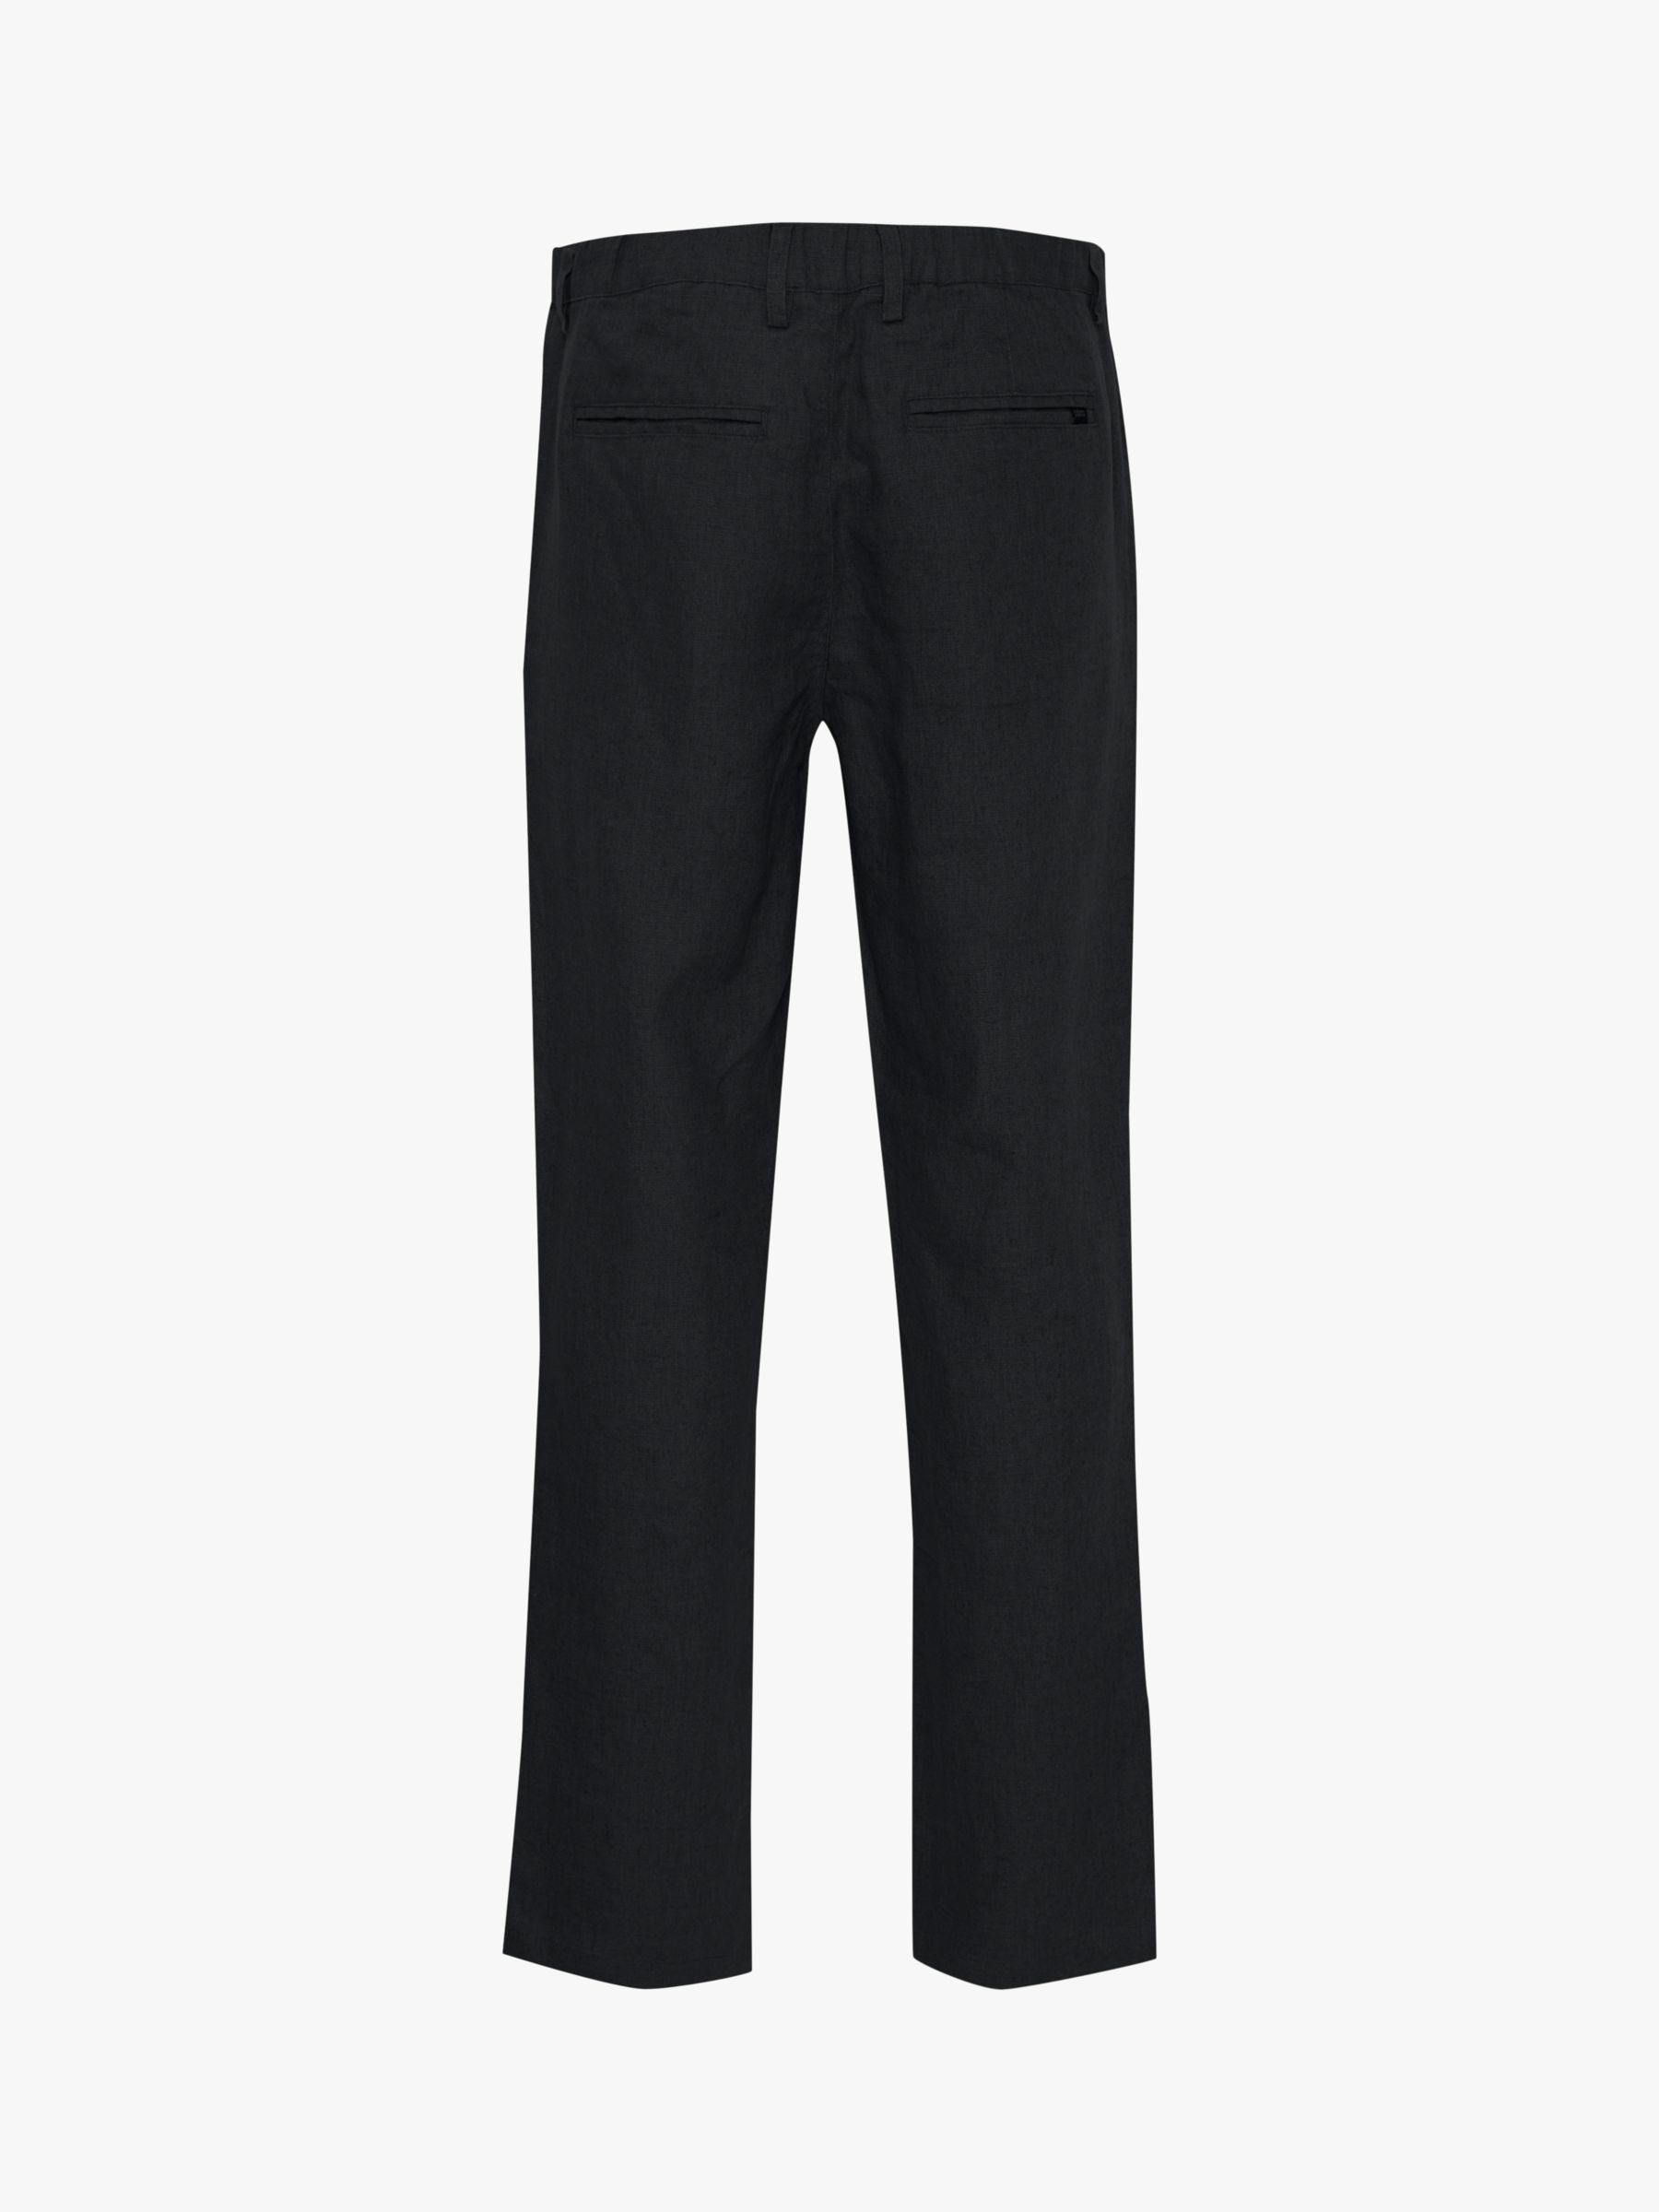 Casual Friday Pandrup Regular Fit Linen Trousers, Black, 28R